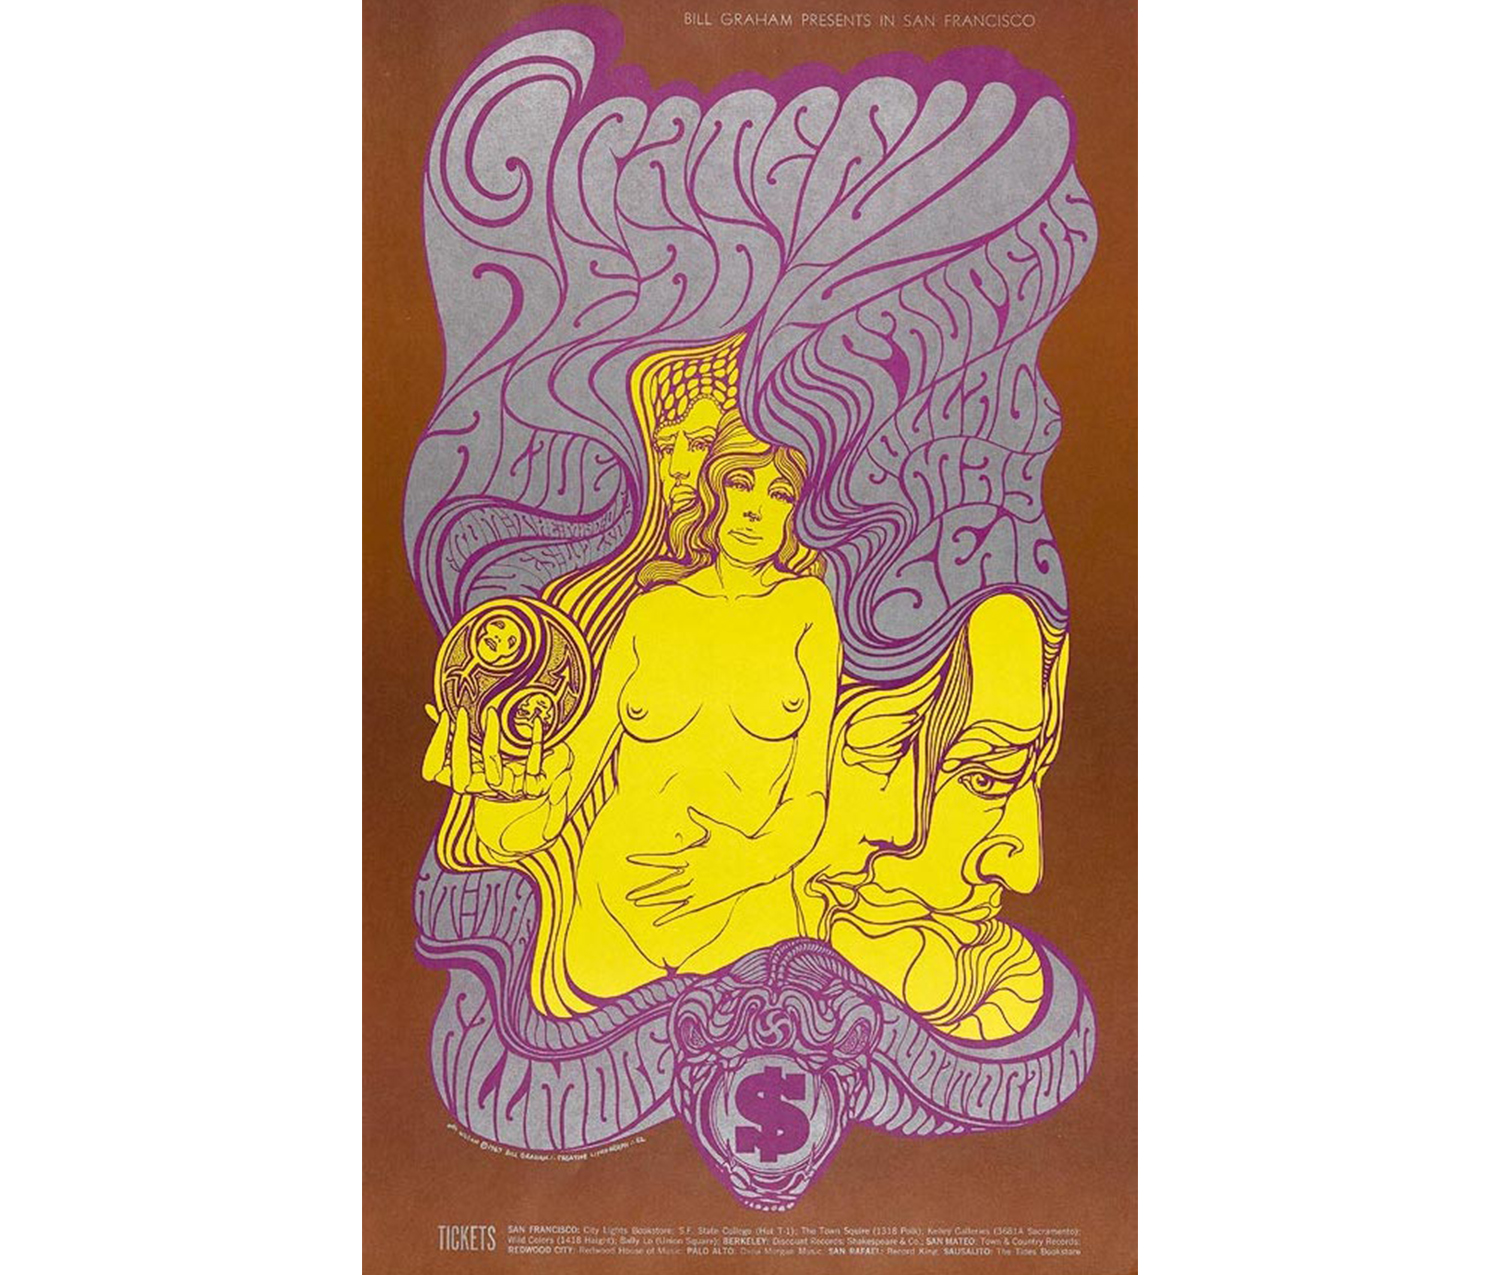 nude woman with proper left hand on stomach, proper right holding sphere with yin/yang figures on it, two larger heads on her proper left and one near her head all surrounded by text advertising a Grateful Dead concert